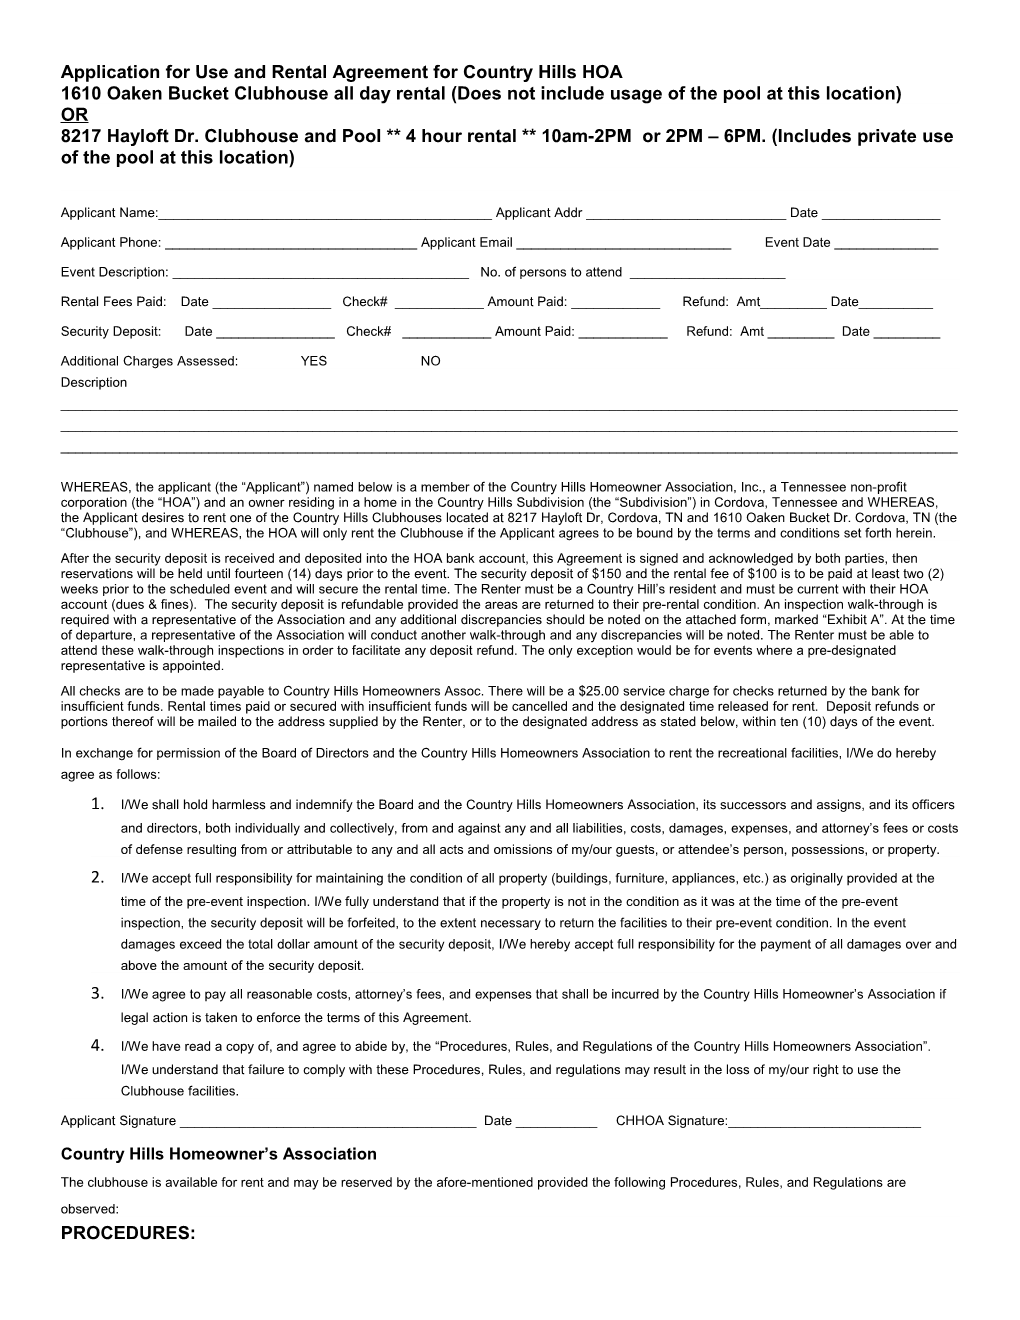 Application for Use and Rental Agreement for Country Hills HOA